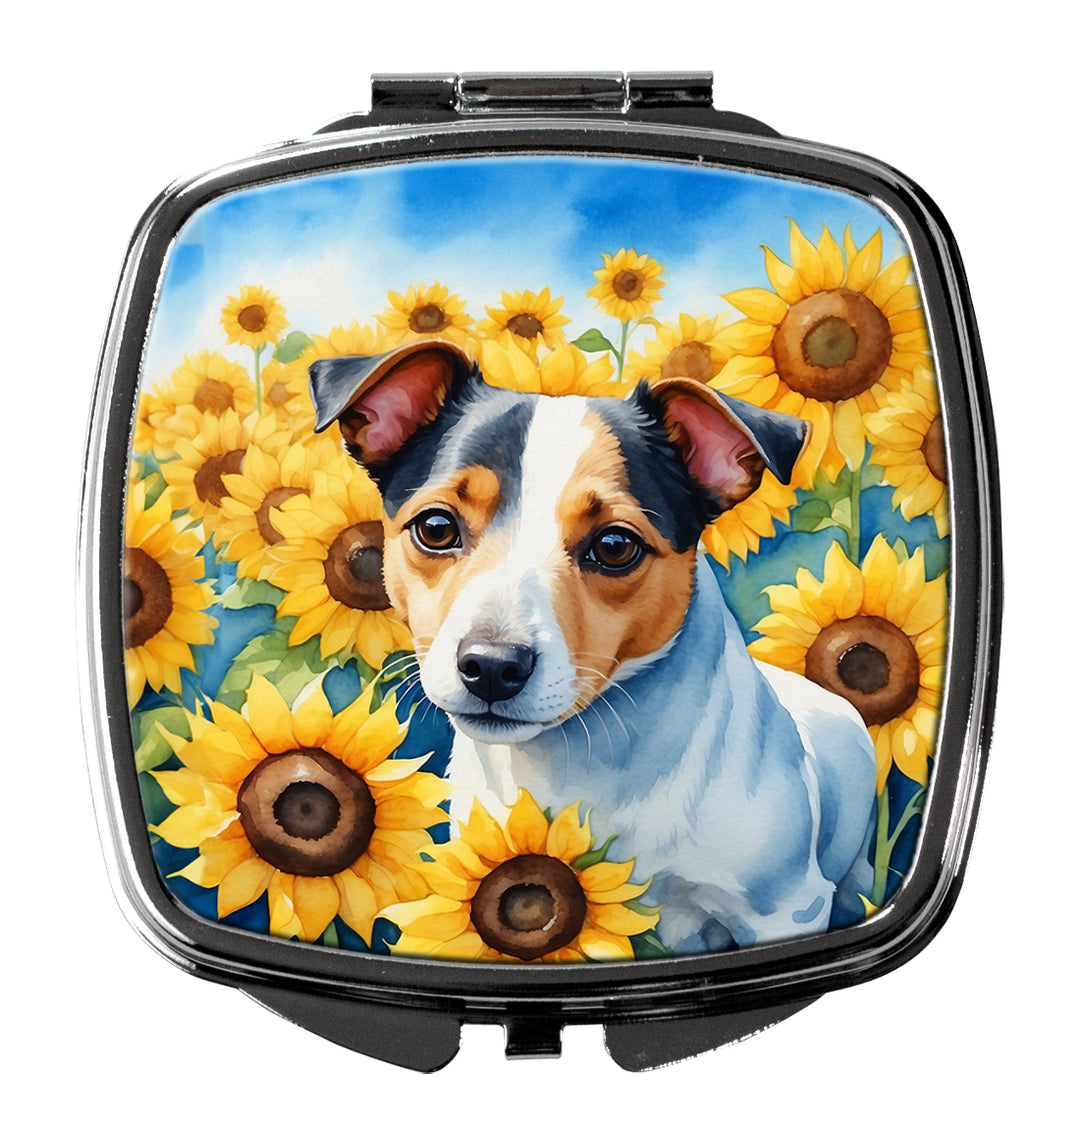 Jack Russell Terrier in Sunflowers Compact Mirror Image 1